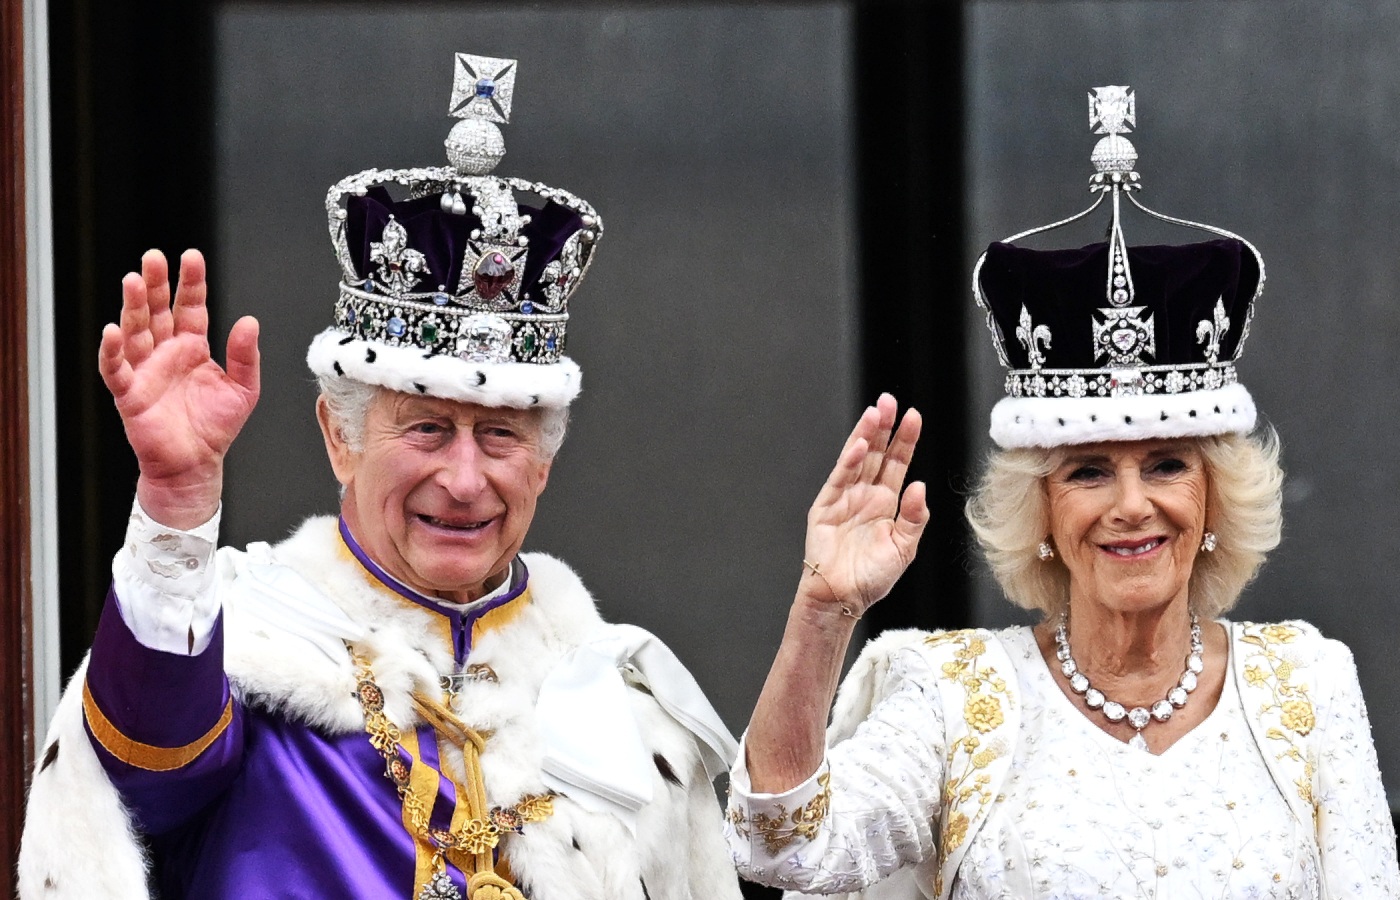 King Charles III and Queen Camilla waves from The Buckingham Palace balcony during the Coronation of King Charles III and Queen Camilla on May 6, 2023